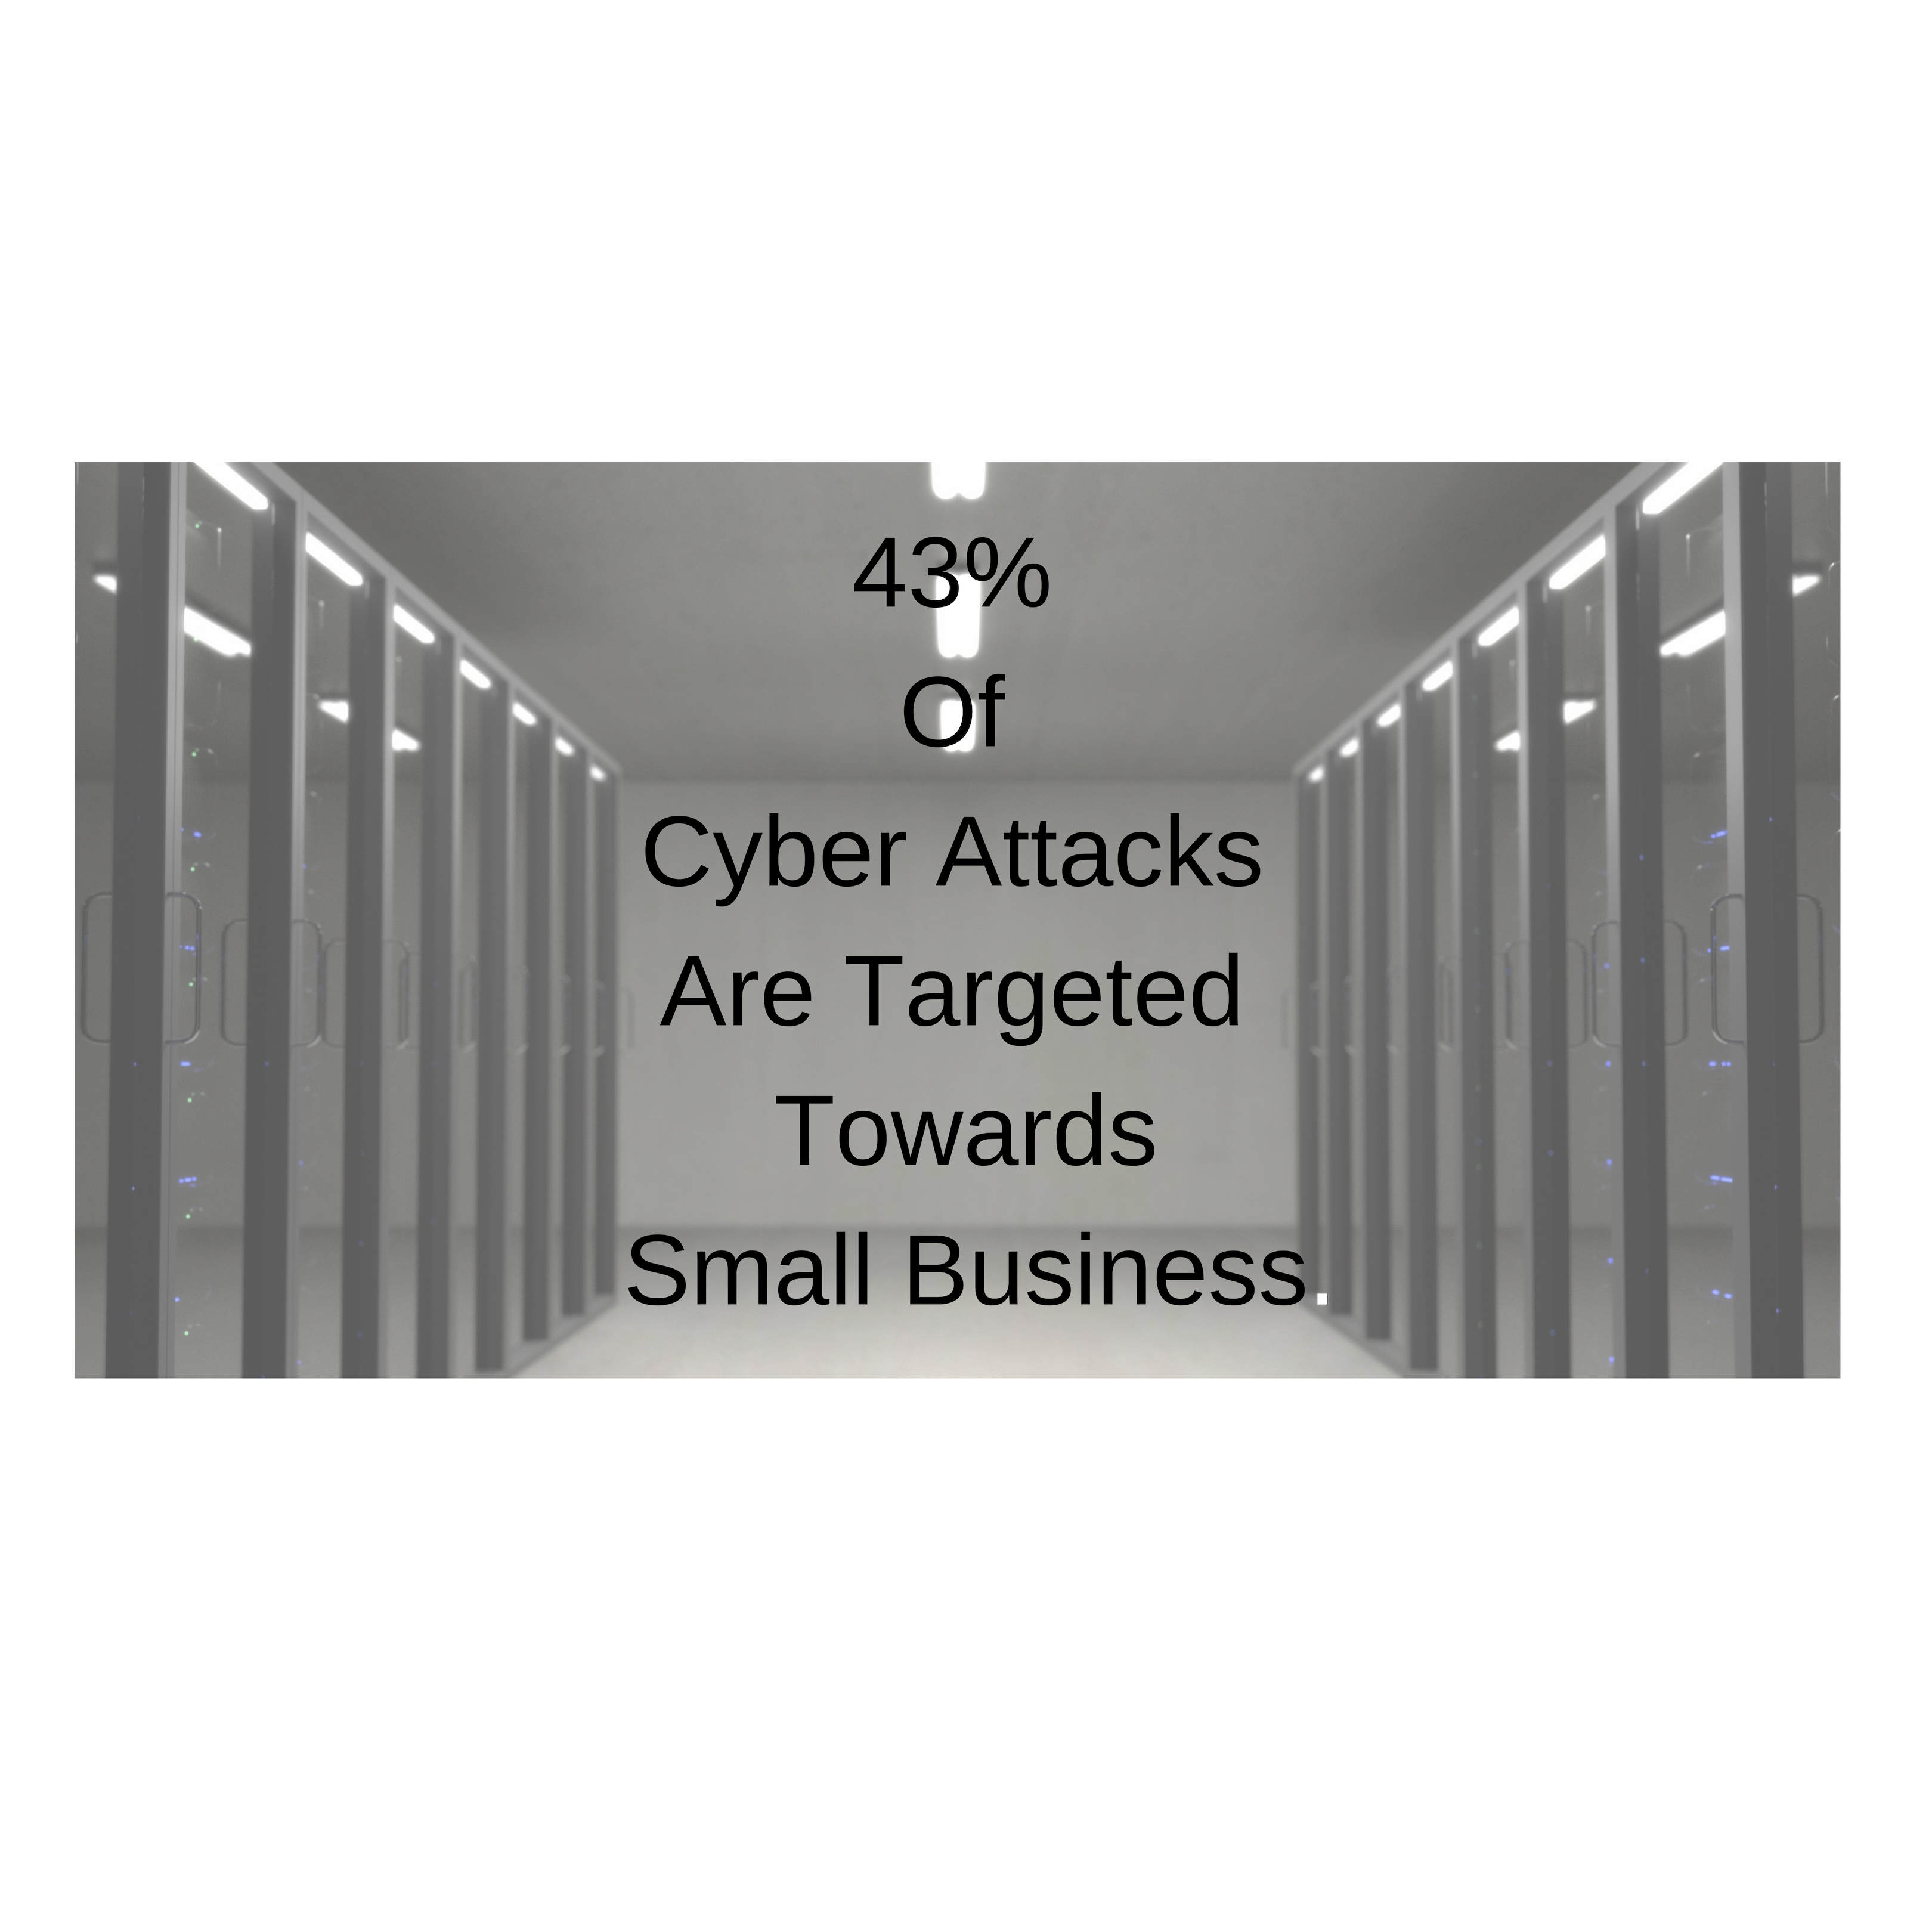 43 Of Cyber Attacks Are Targeted Towards Small Business.